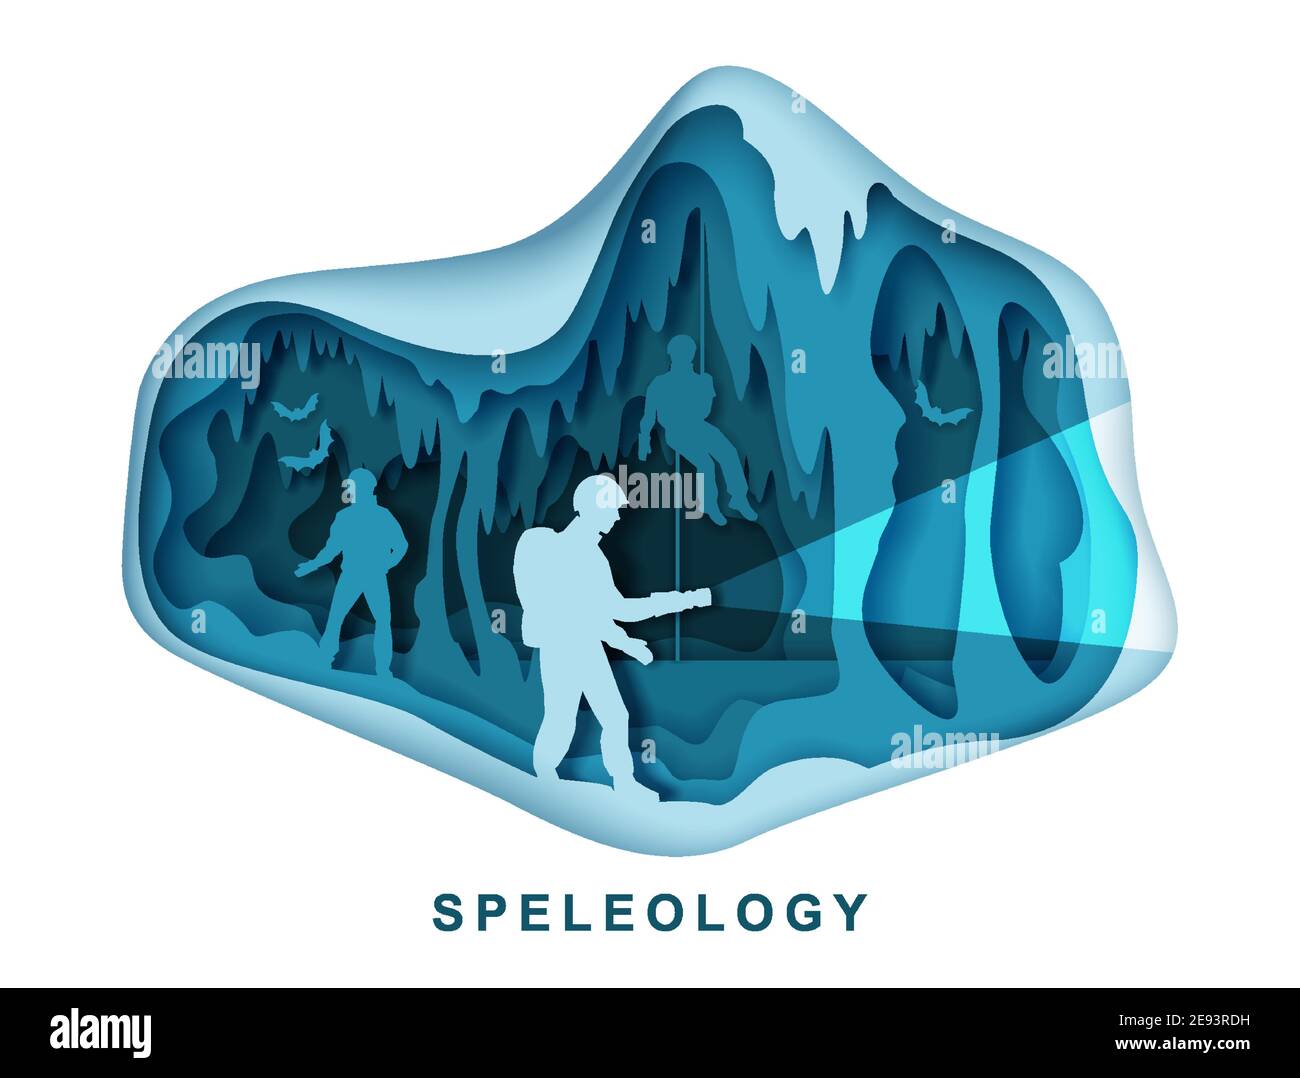 Speleology. Spelunker and bat silhouettes in underground cave, vector paper cut illustration. Science, sport tourism. Stock Vector